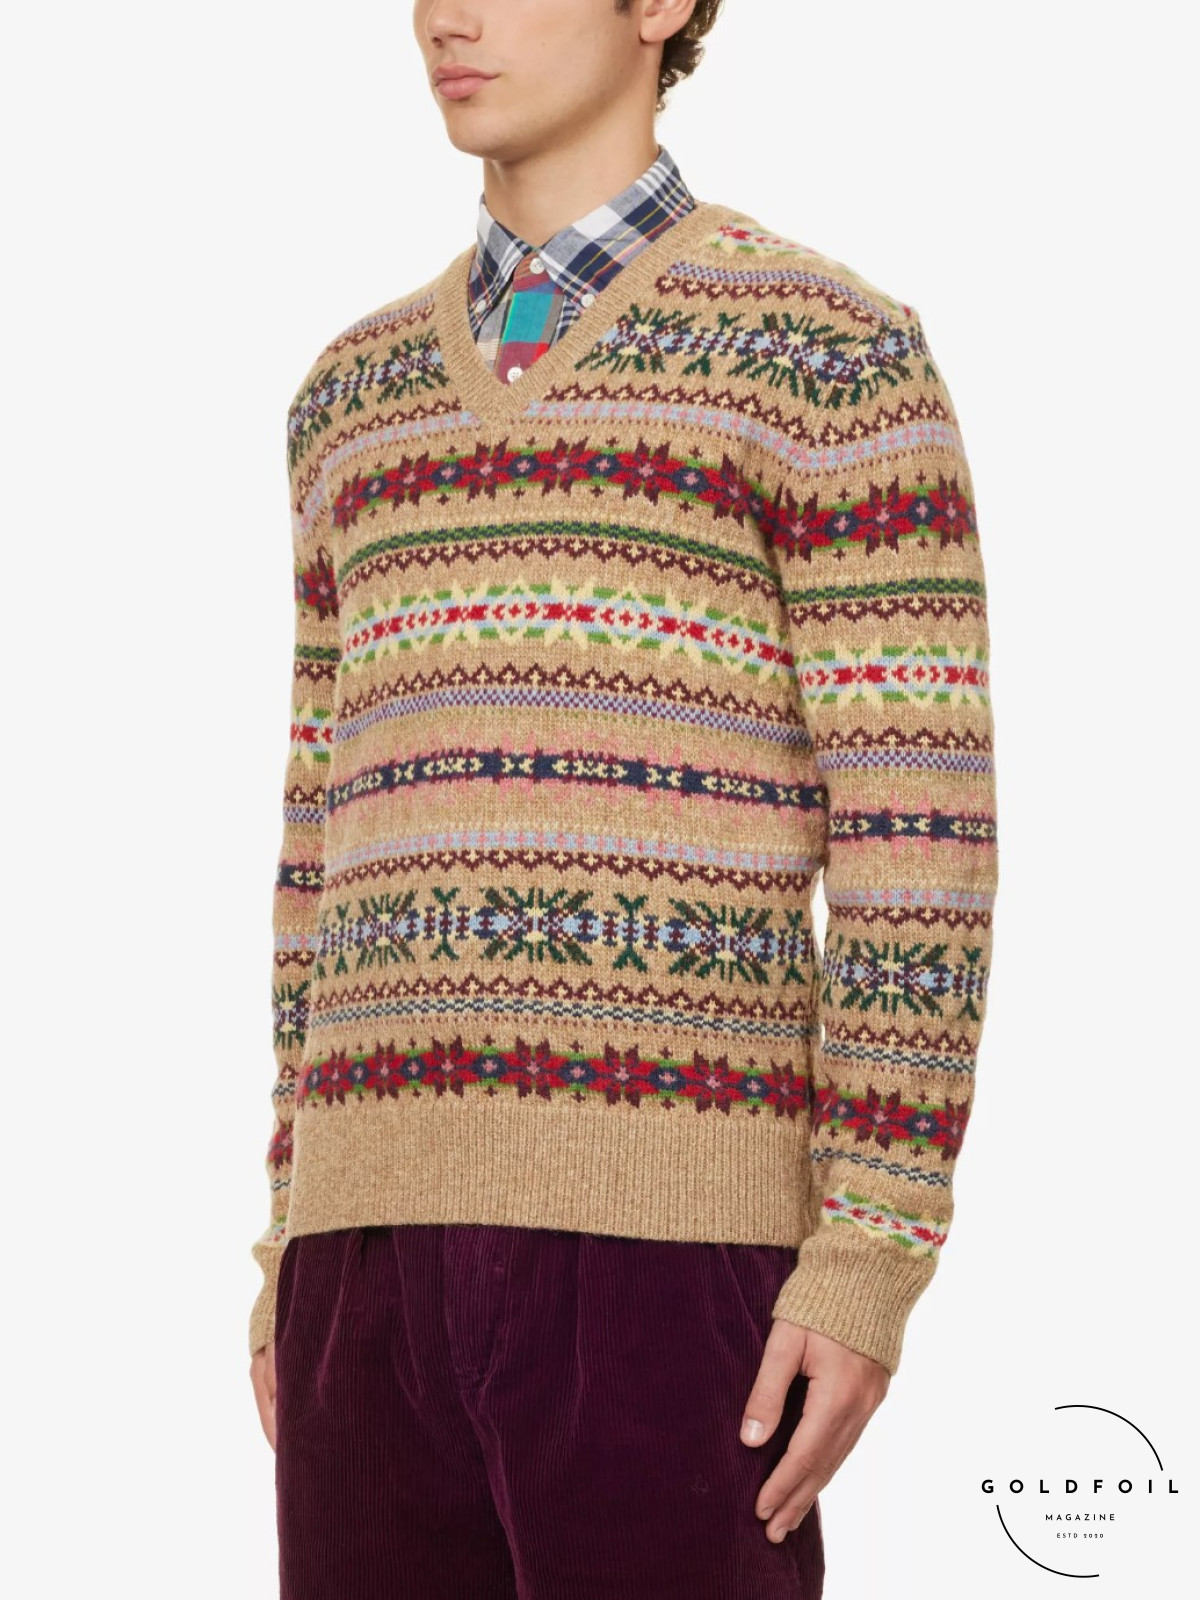 A Polo Ralph Lauren men's knit jumper in Christmas patterns perfect for the festive season, with a V neck complimented by a checkered shirt and burgundy trousers